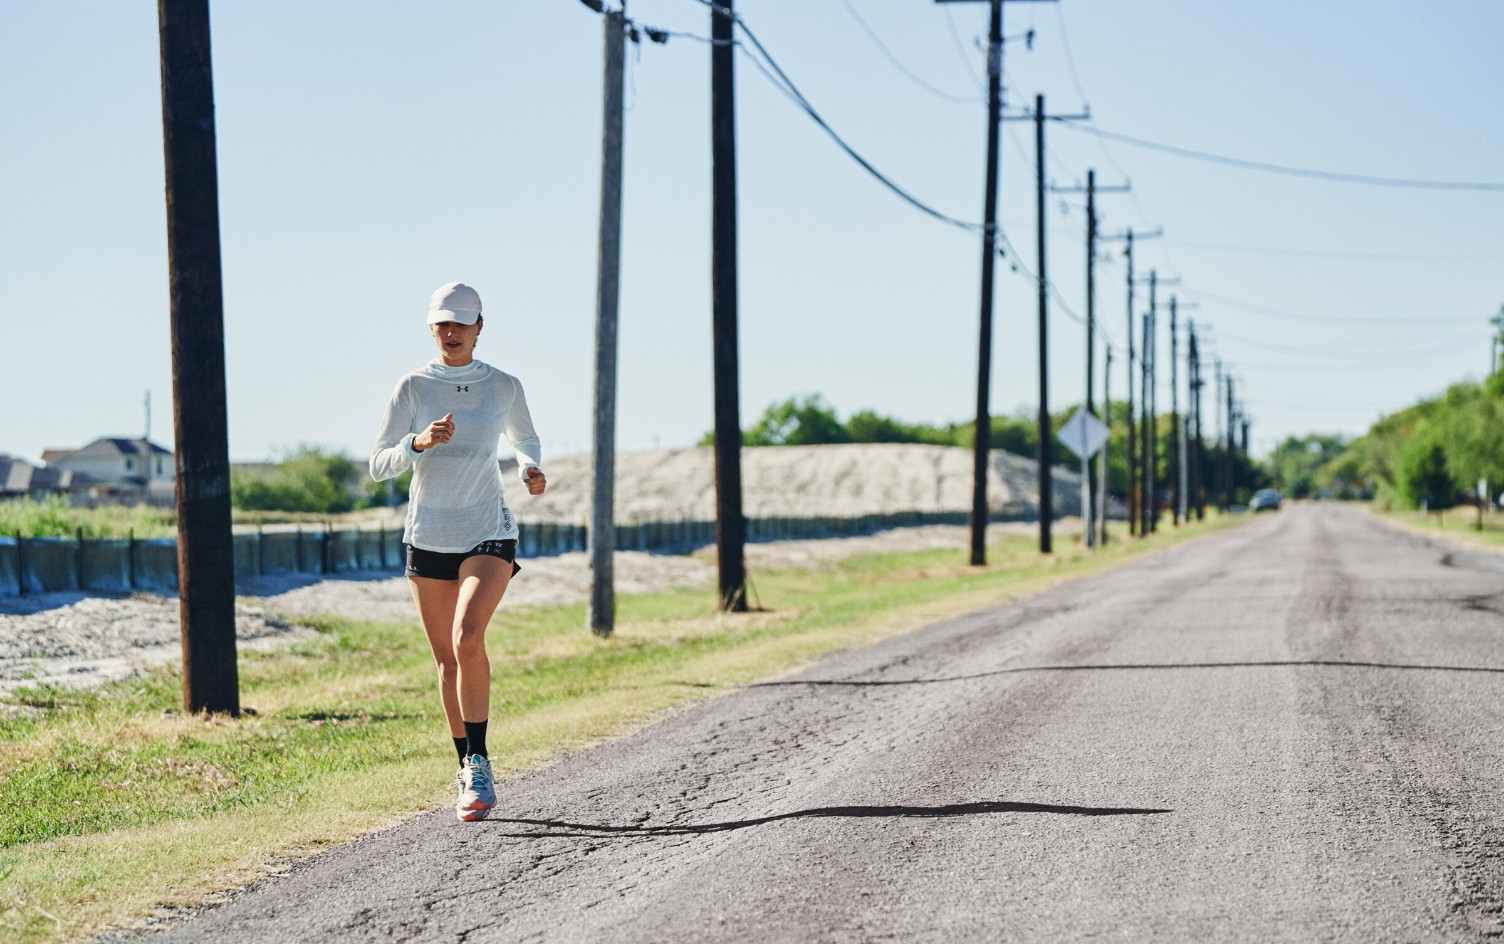 How to run efficiently on concrete, sand, dirt or trail